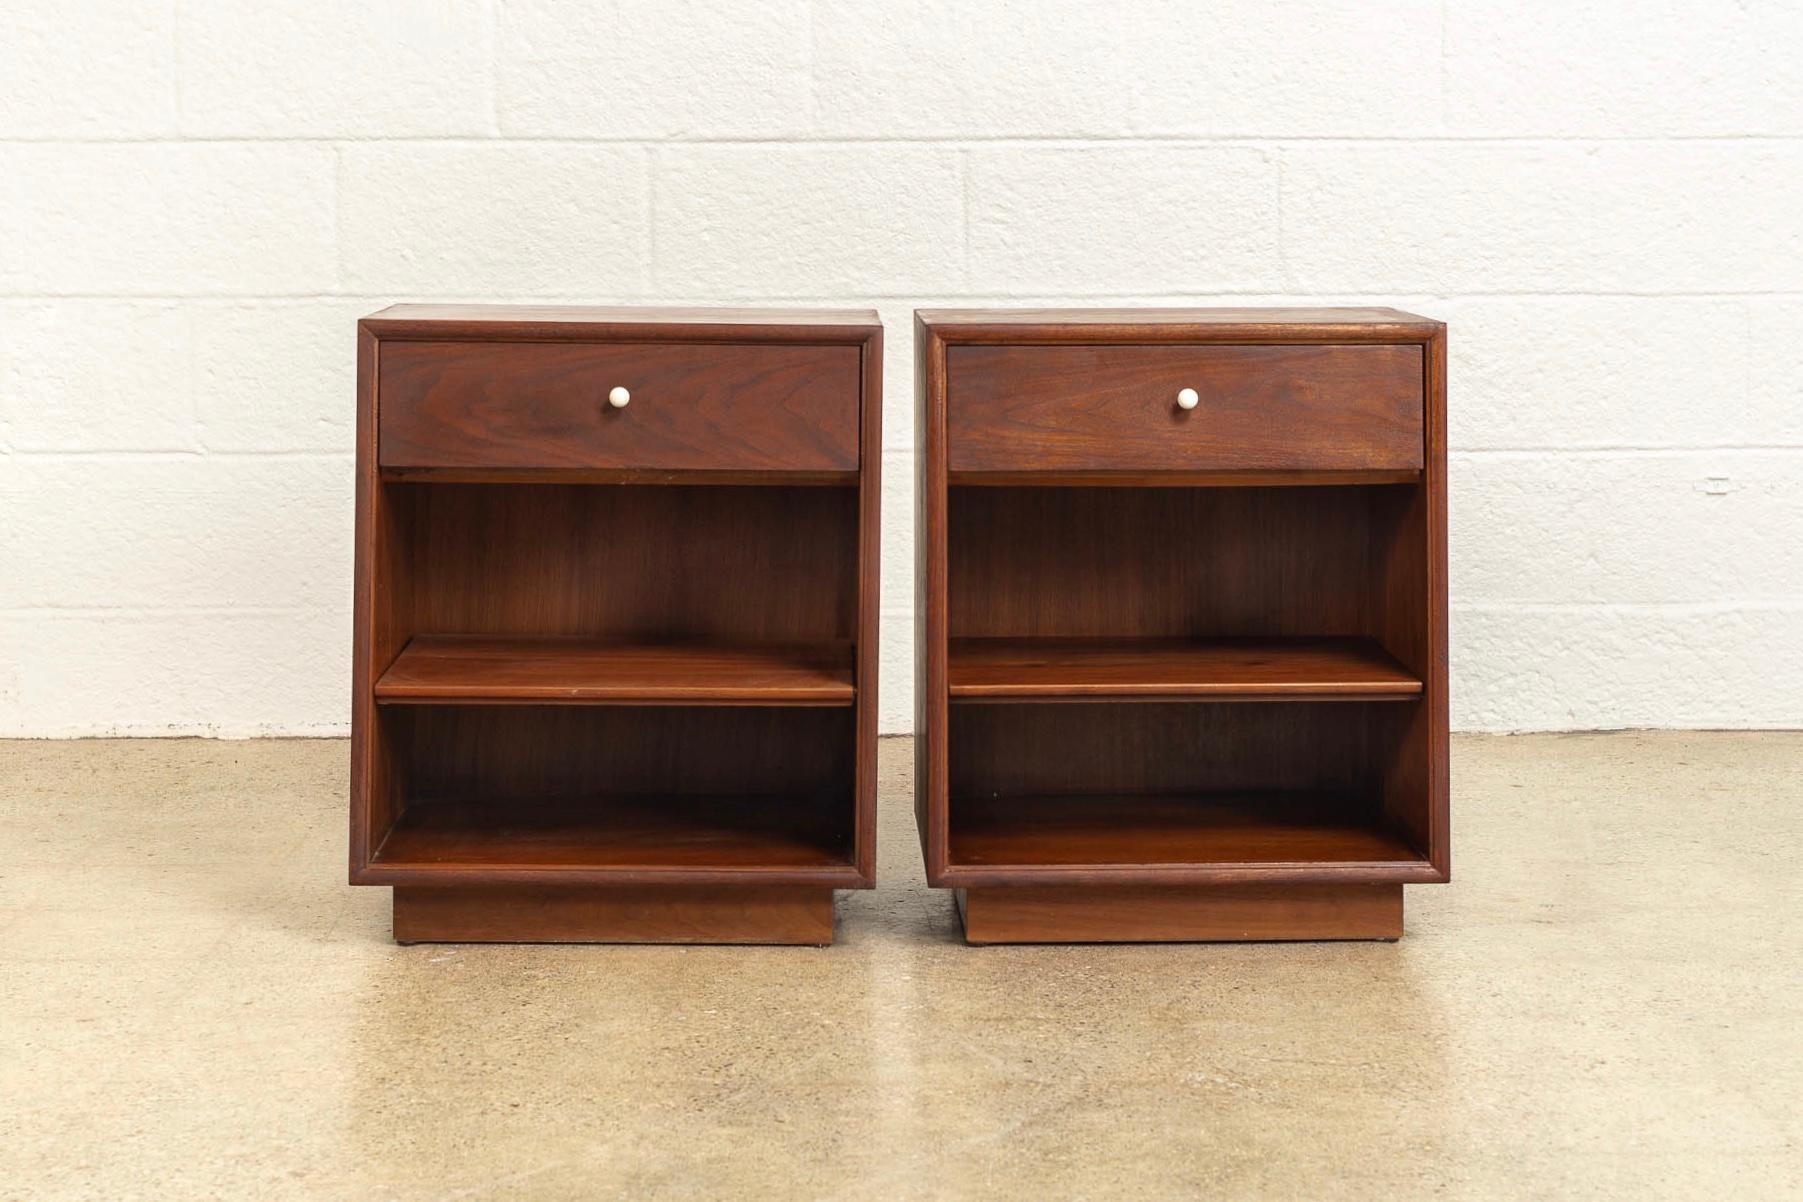 This pair of vintage Mid-Century Modern nightstand tables from 1964 was designed by Kipp Stewart and Stewart McDougall for the iconic Drexel Declaration line. Well constructed from walnut wood, the sleek, streamlined design features one upper drawer